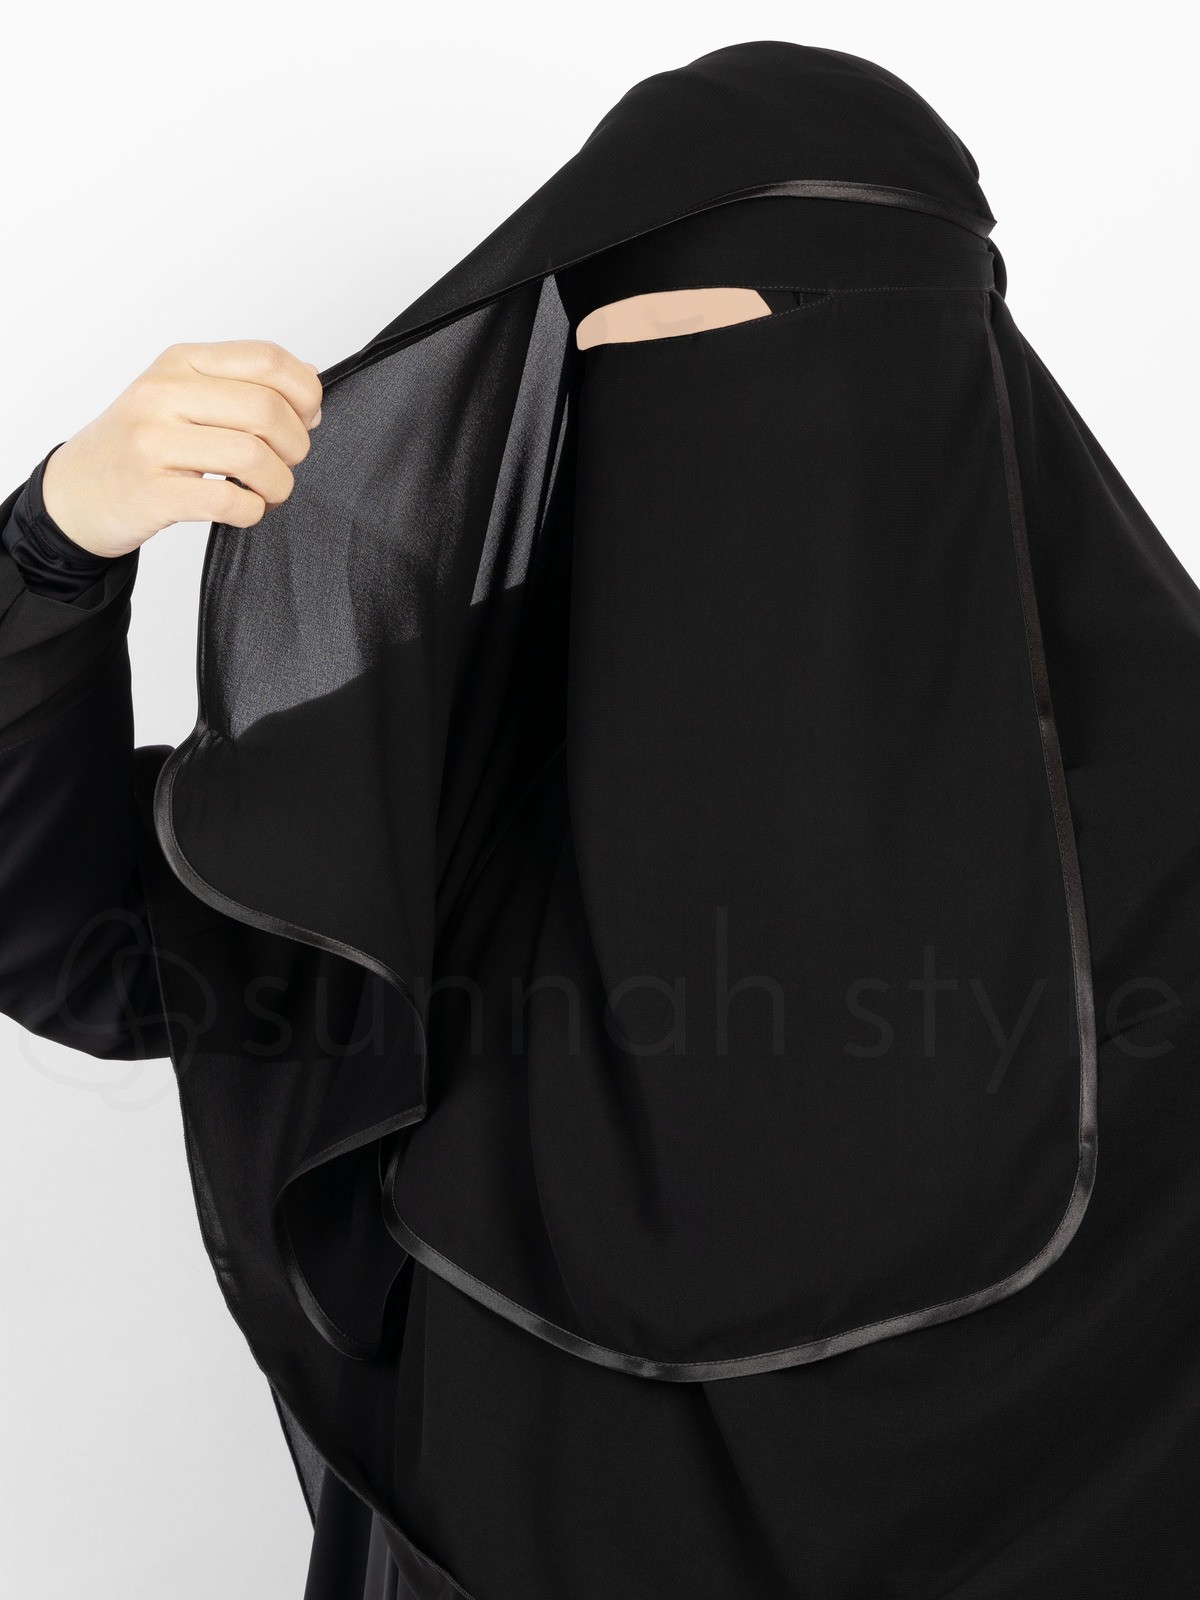 Sunnah Style - Satin Trimmed Two Layer Niqab (Black)